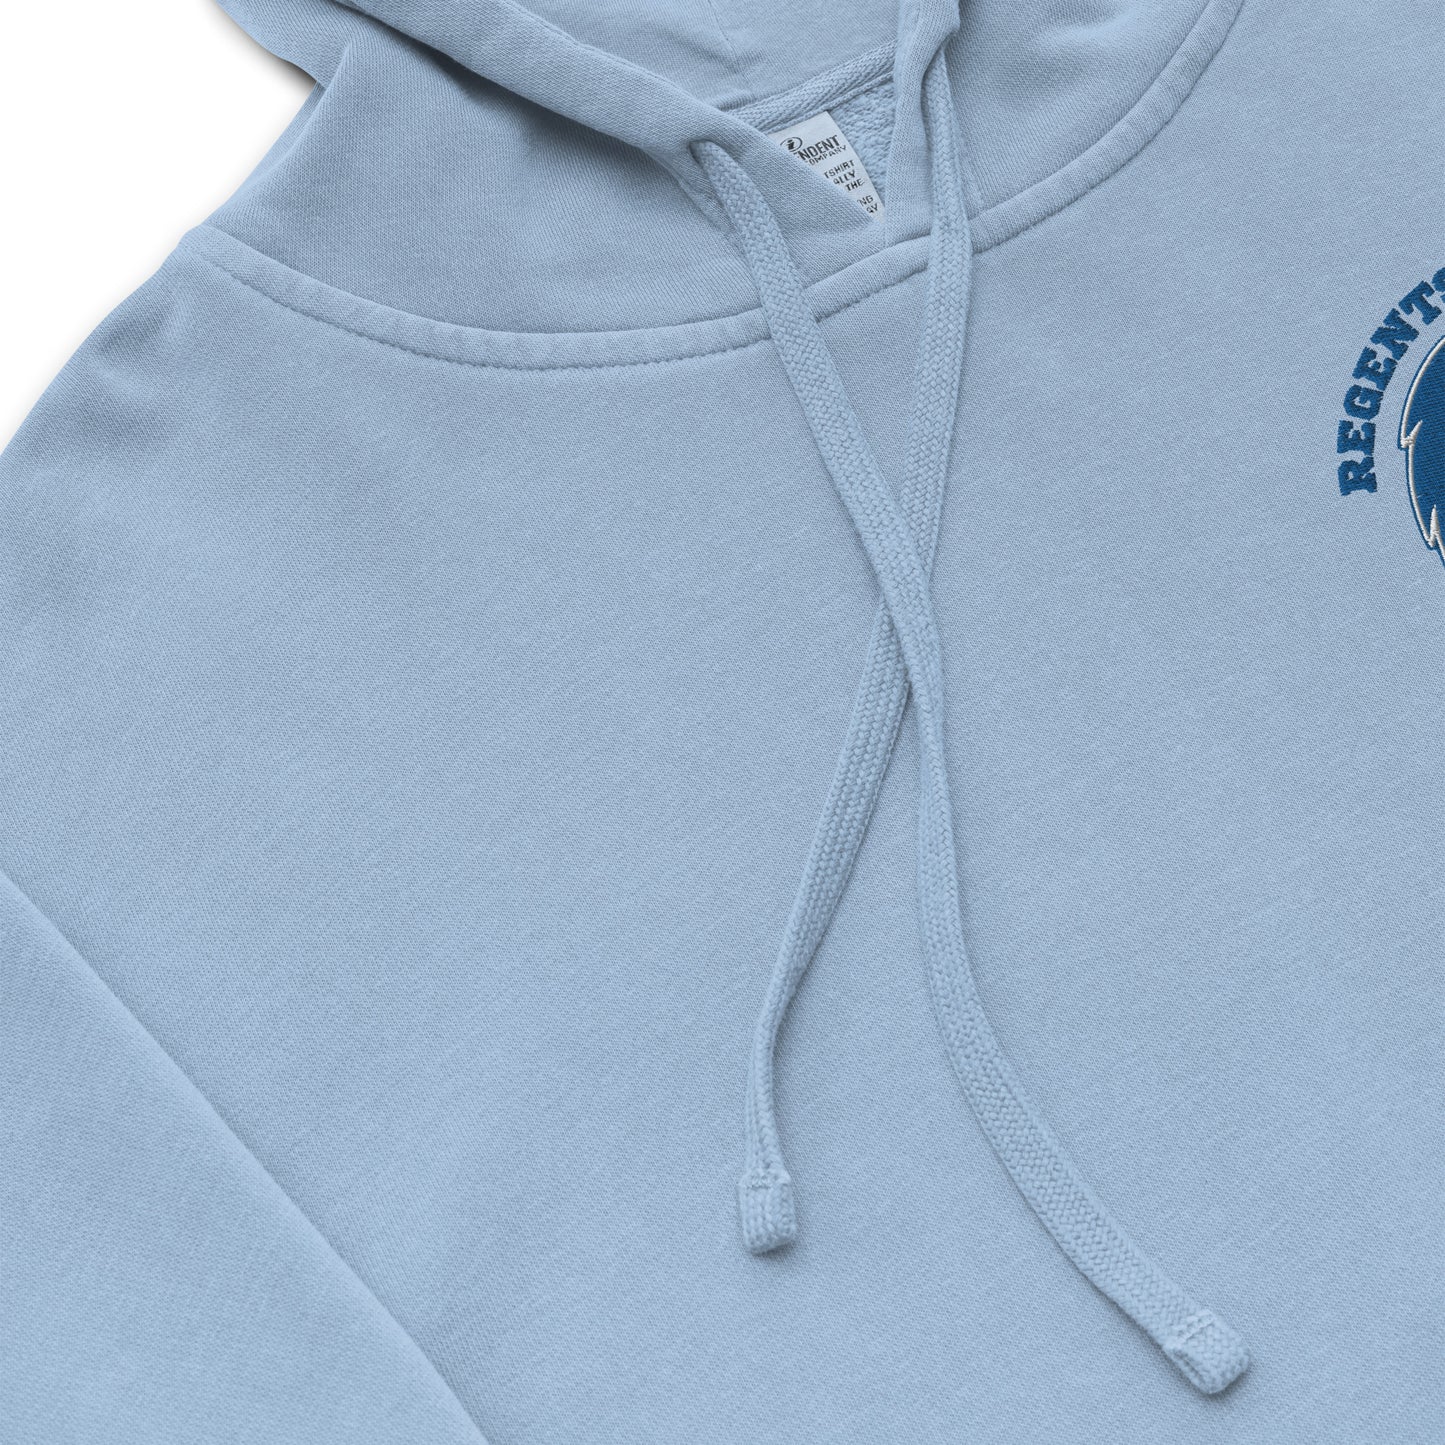 Madison West Regents VB Embroidered Pigment-Dyed Hoodie